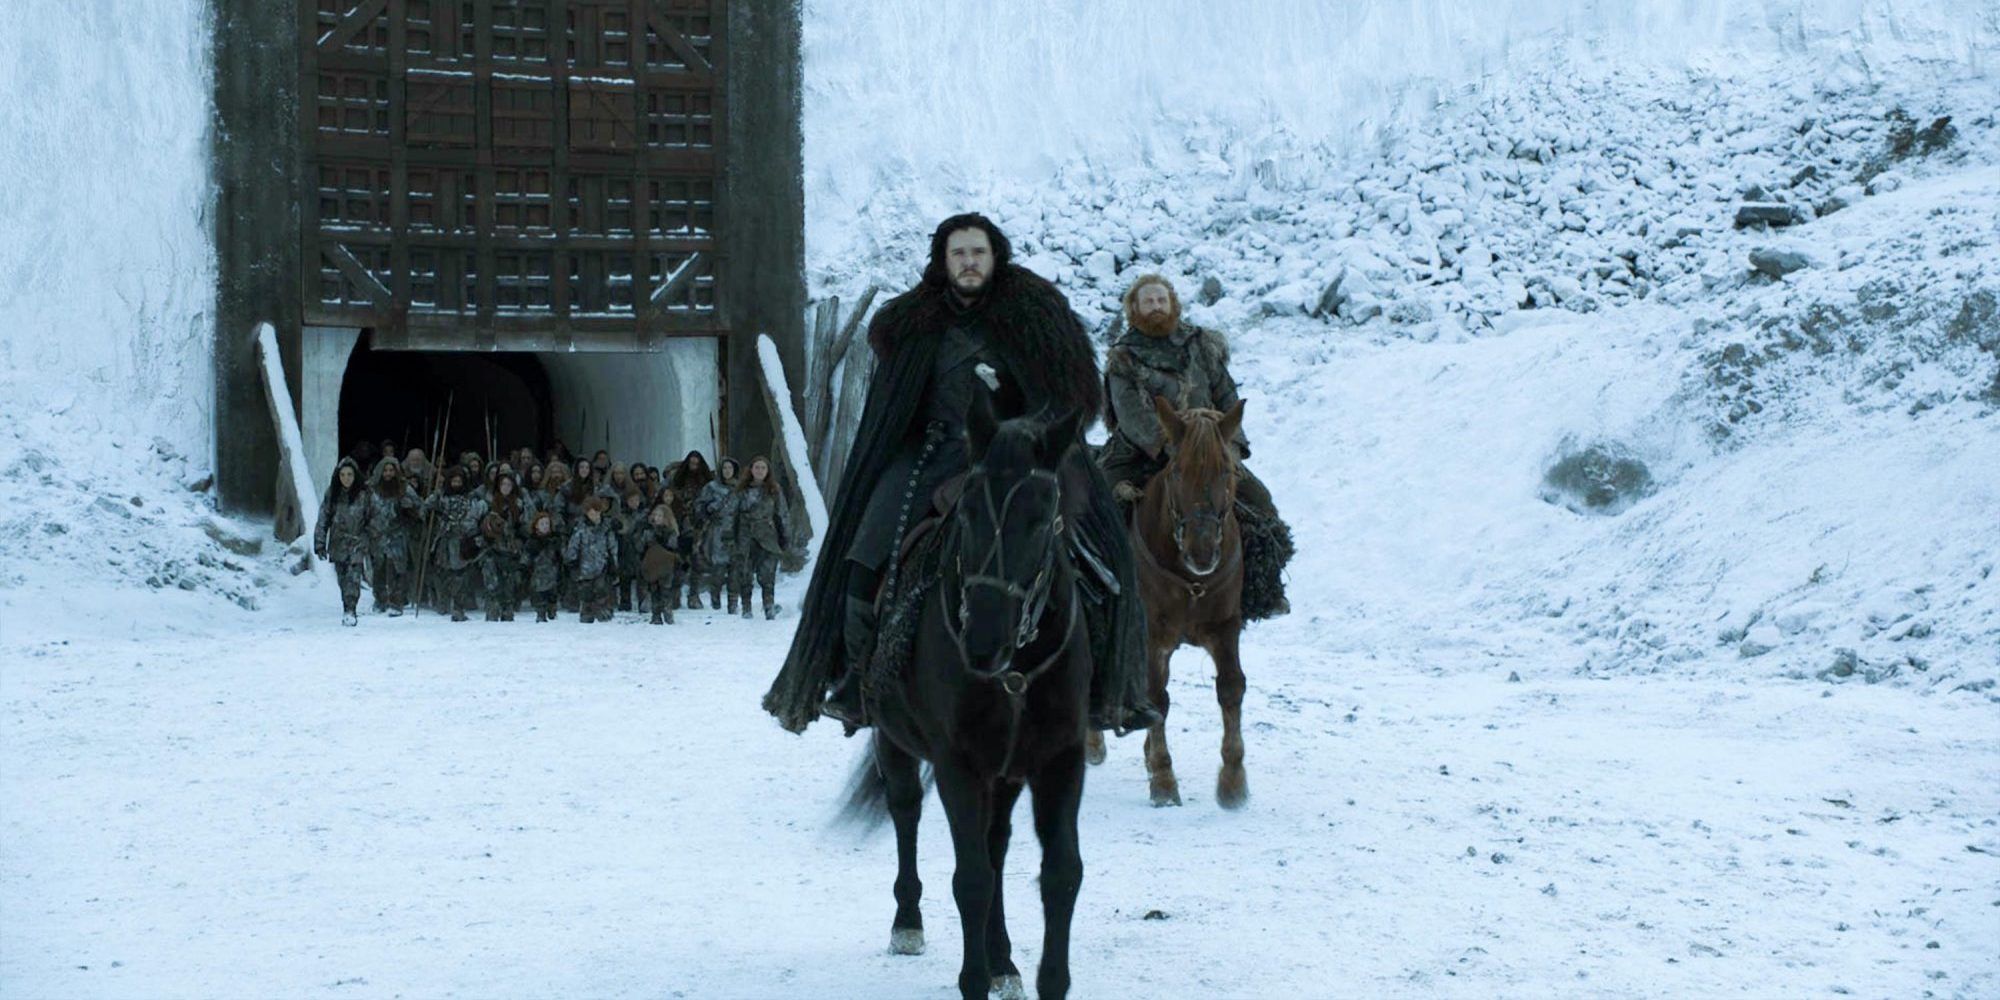 Jon Snow leading the Wildlings Beyond the Wall in Game of Thrones